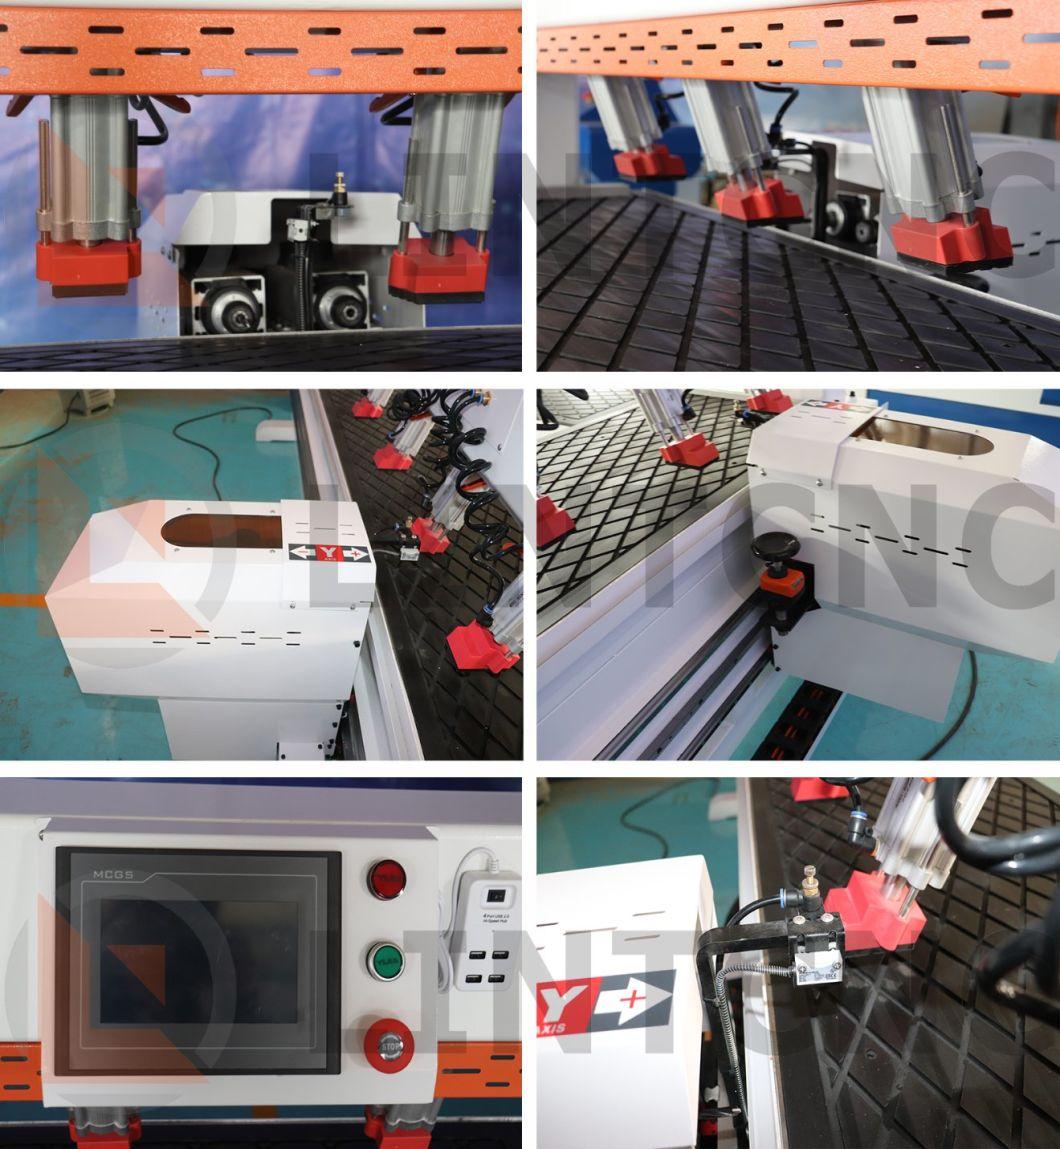 Single Double Head Wood CNC Side Hole Drilling Machine for Woodworking Furniture Cabinet Door Kitchen Making